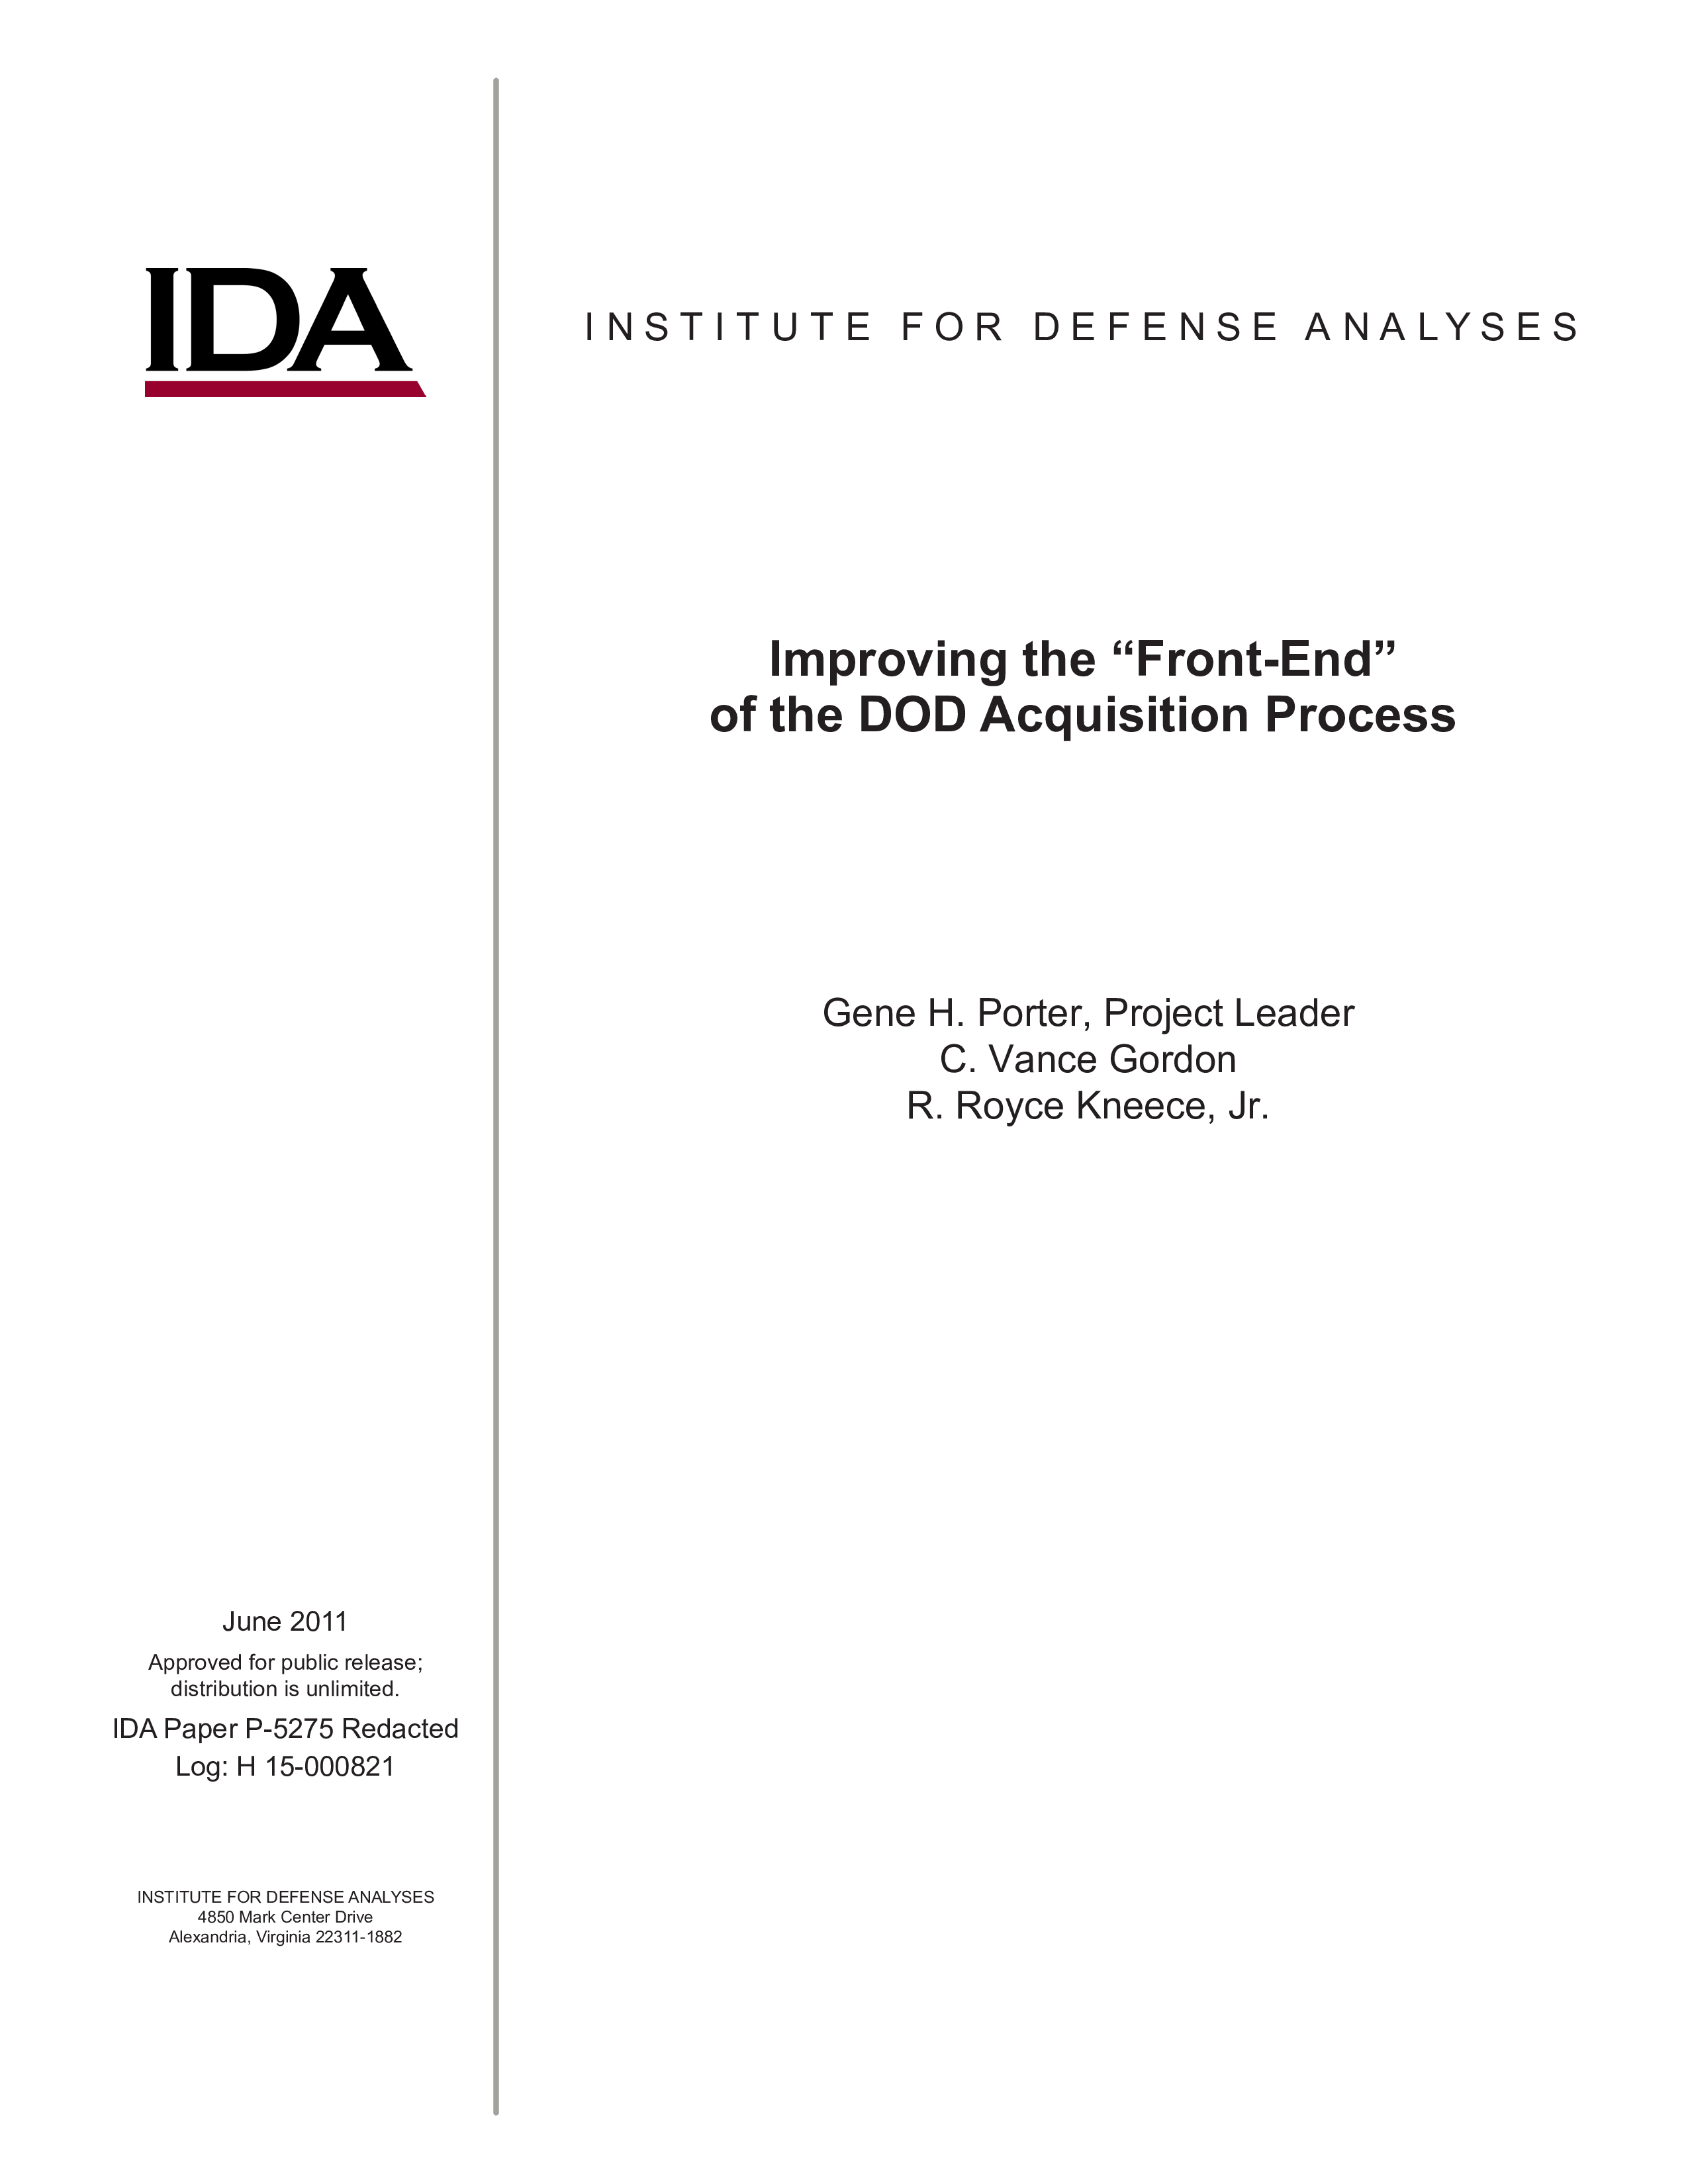 Improving the “Front-End” of the DOD Acquisition Process